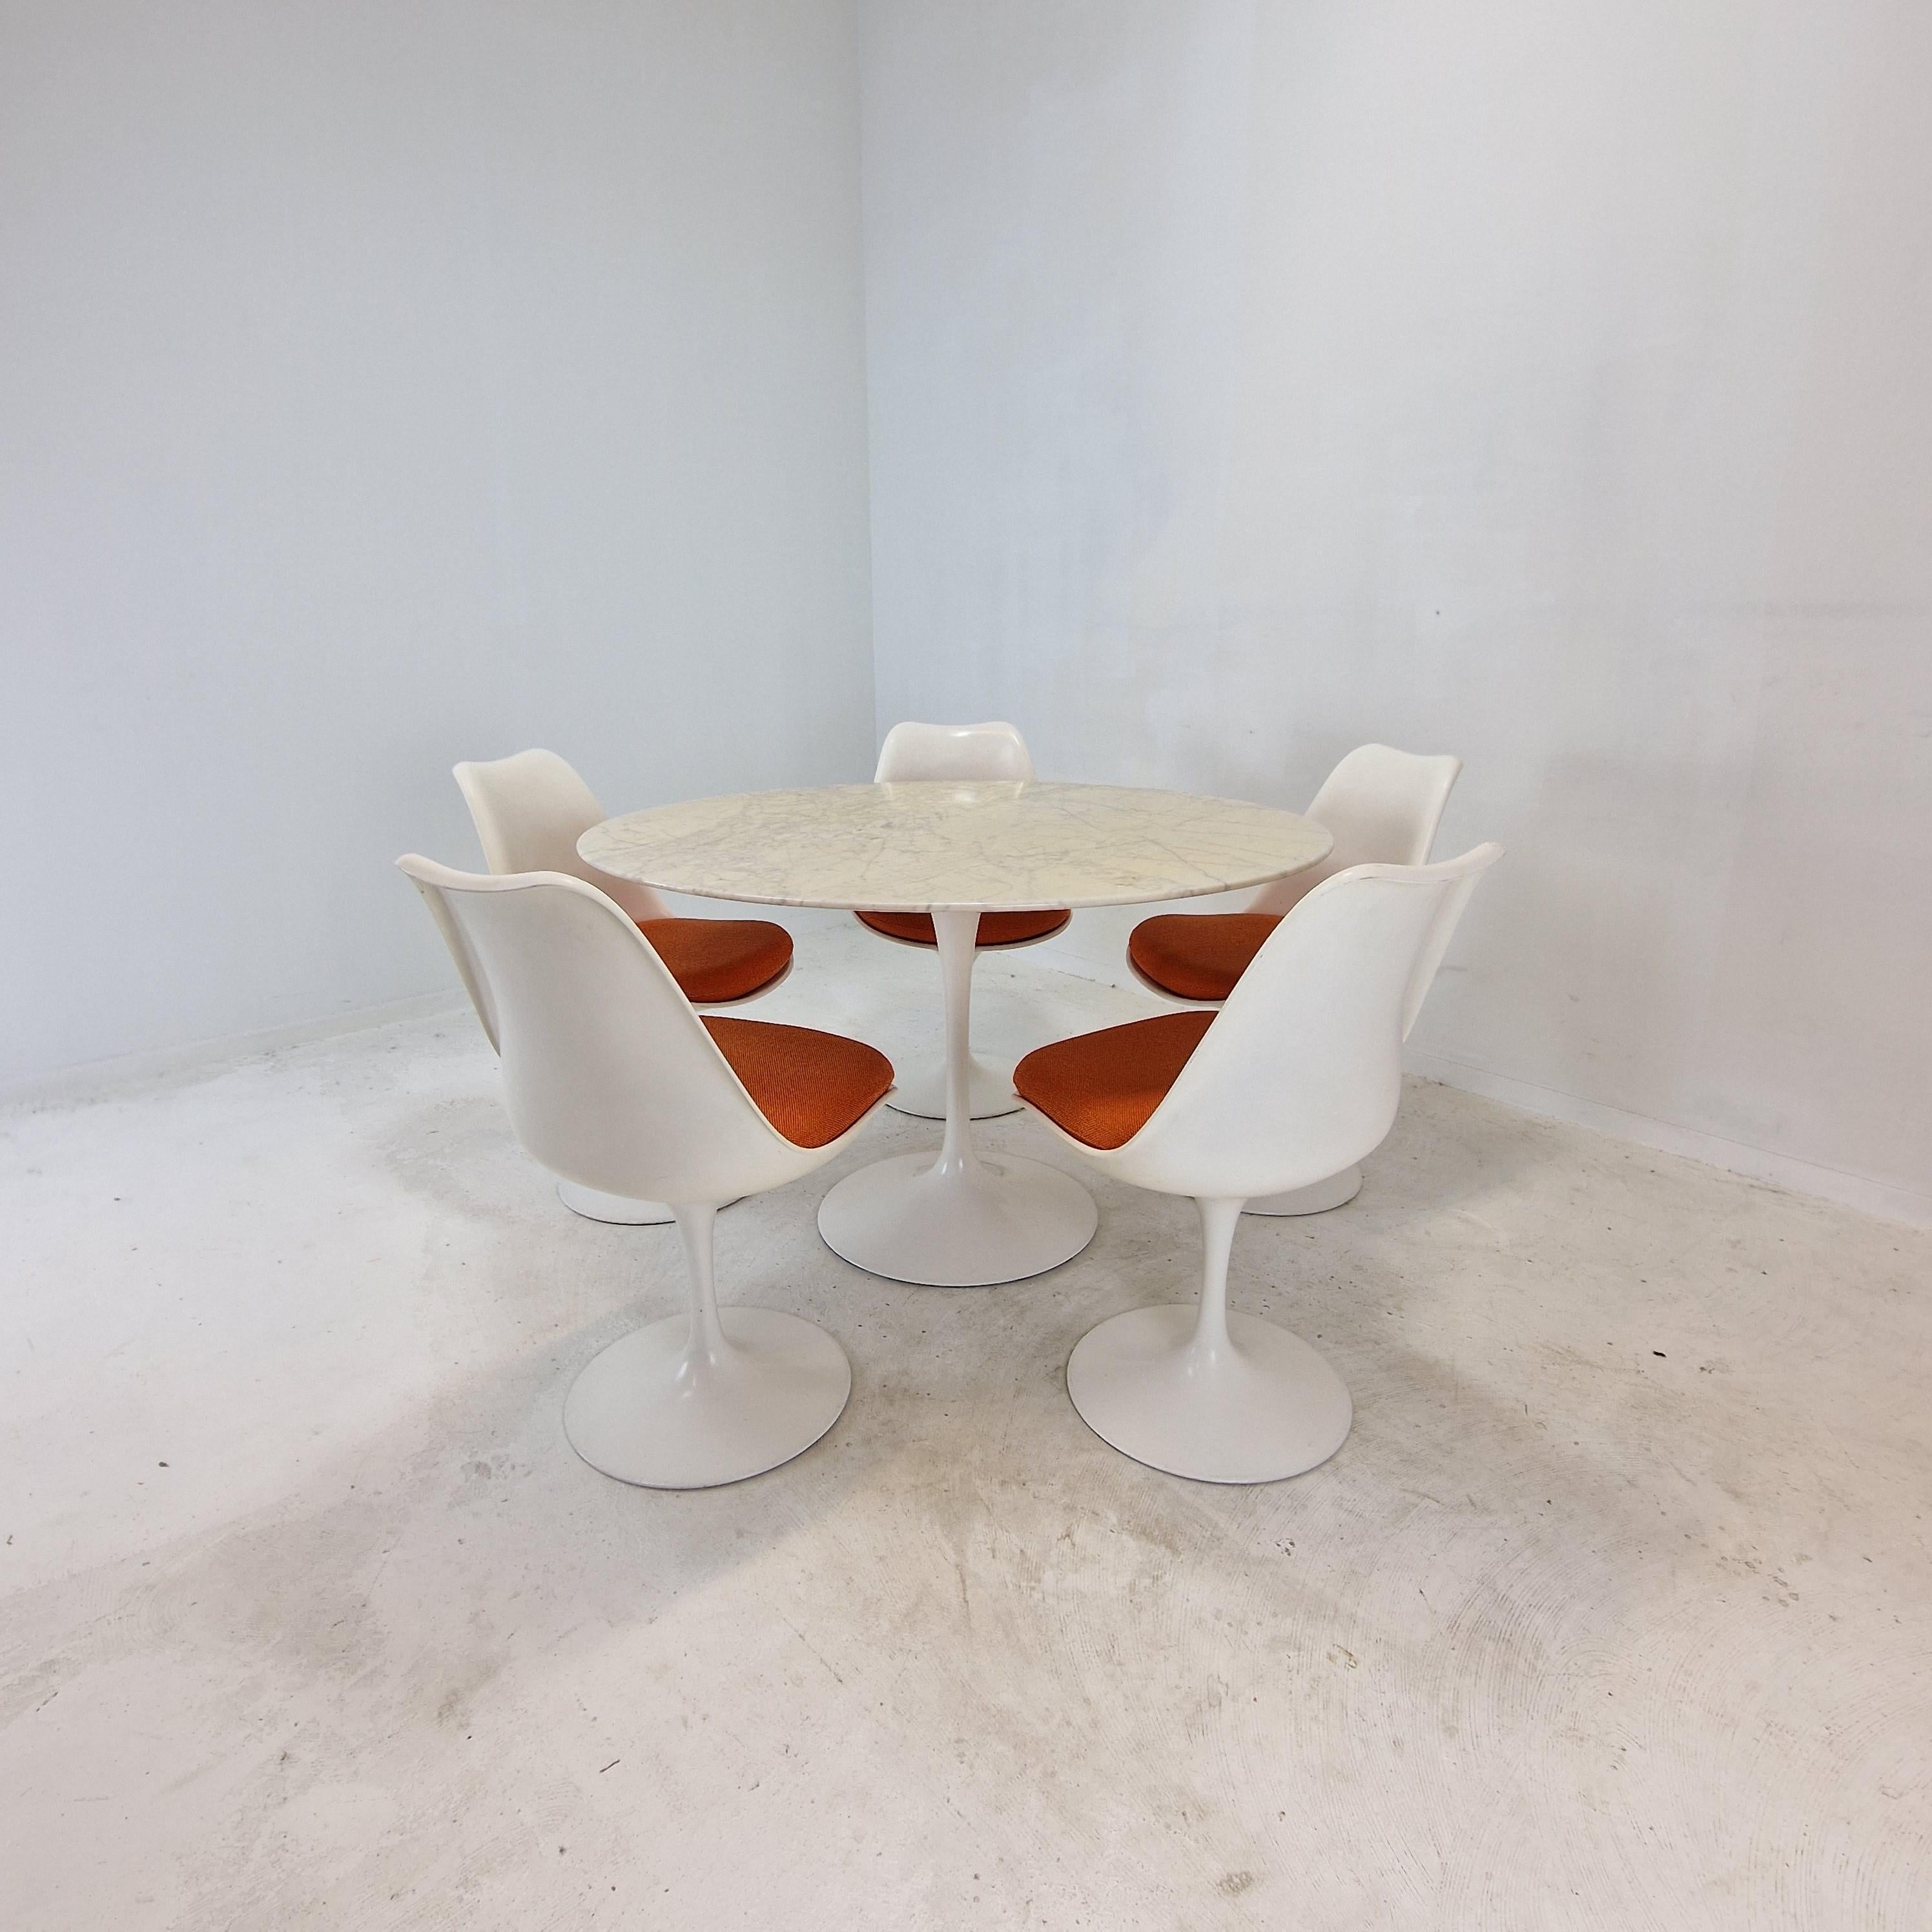 Mid-Century Modern Knoll Marble Dining Table With 5 Chairs by Eero Saarinen, 1960s For Sale